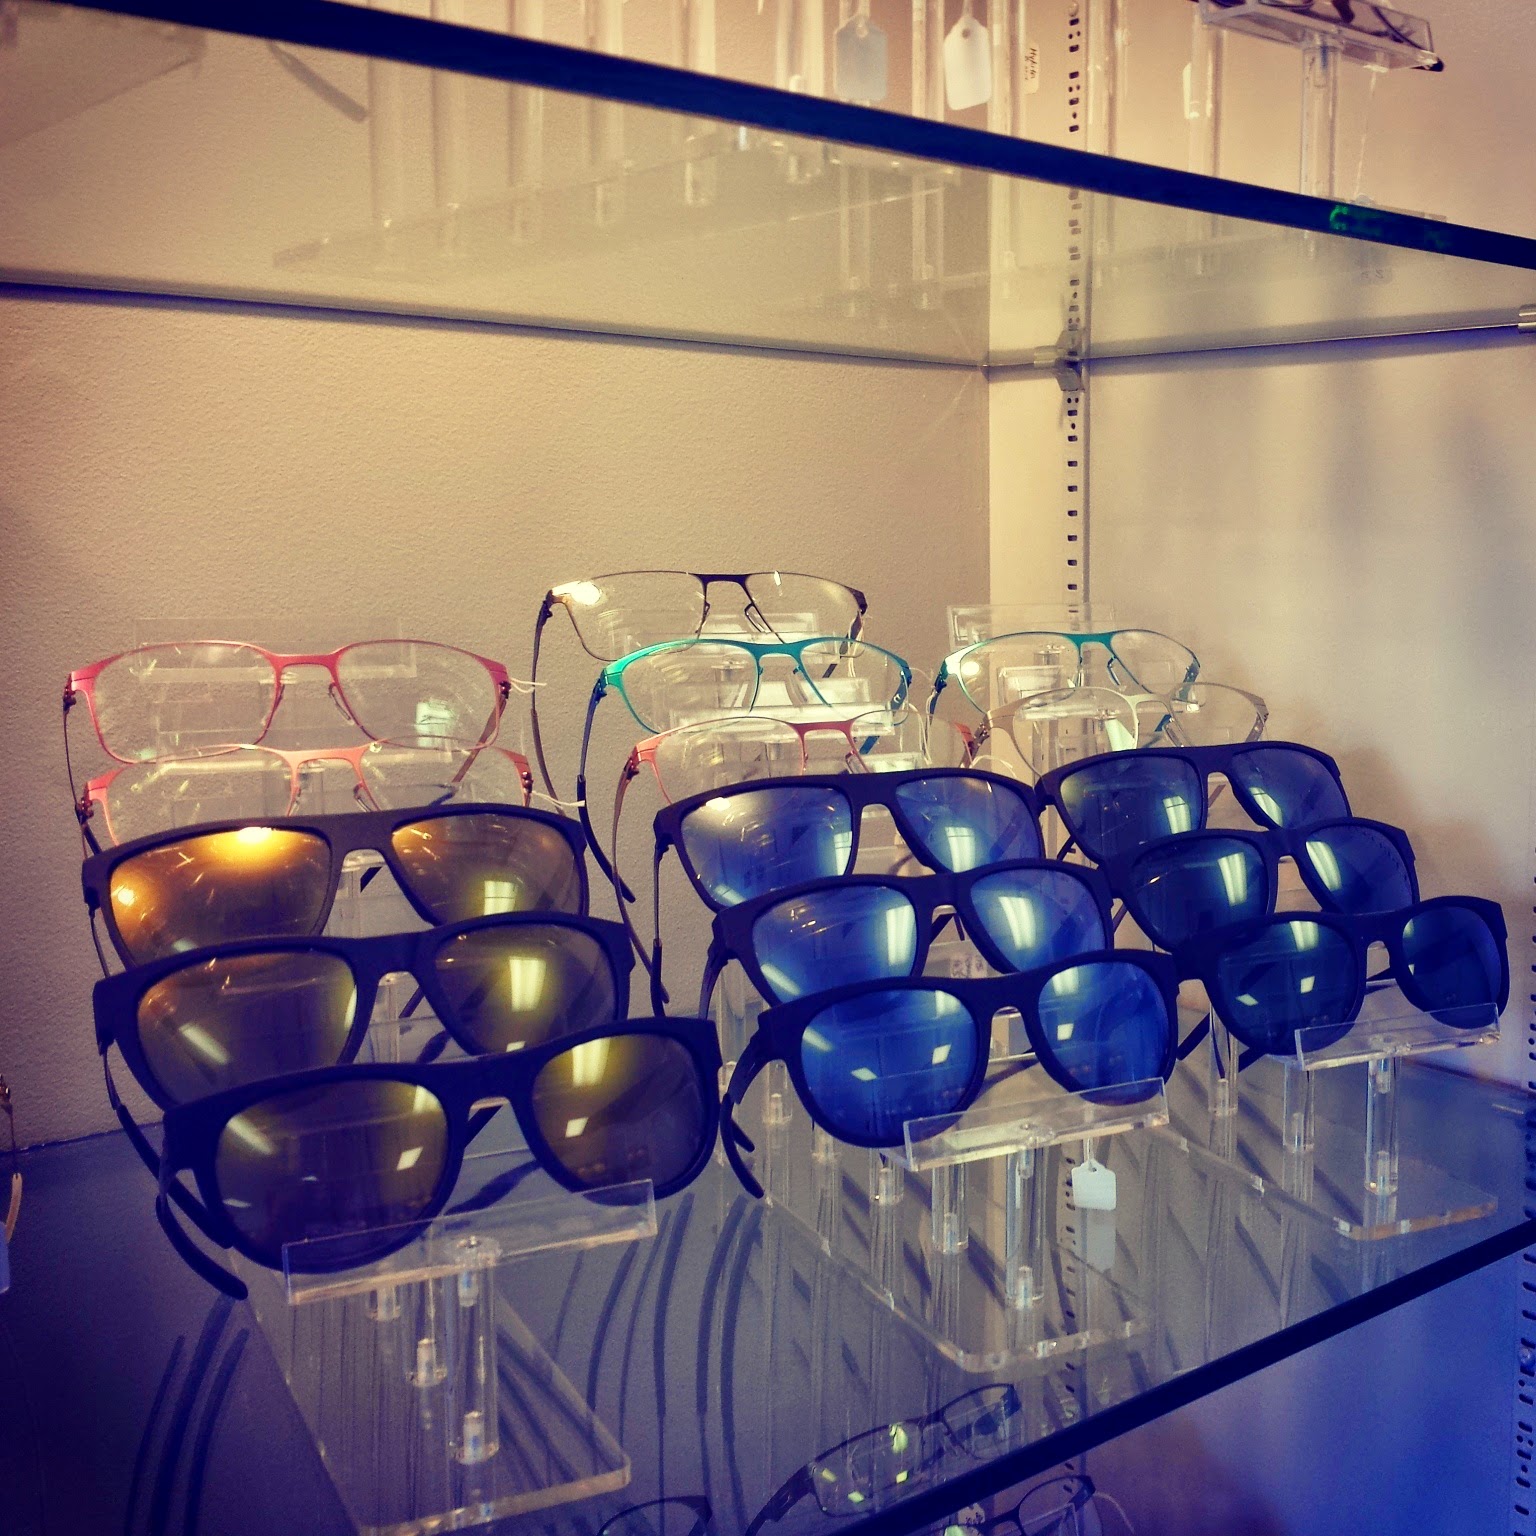 Golden Vision Optometry: New 3D Printed ic! berlin Suns with Frozen ...